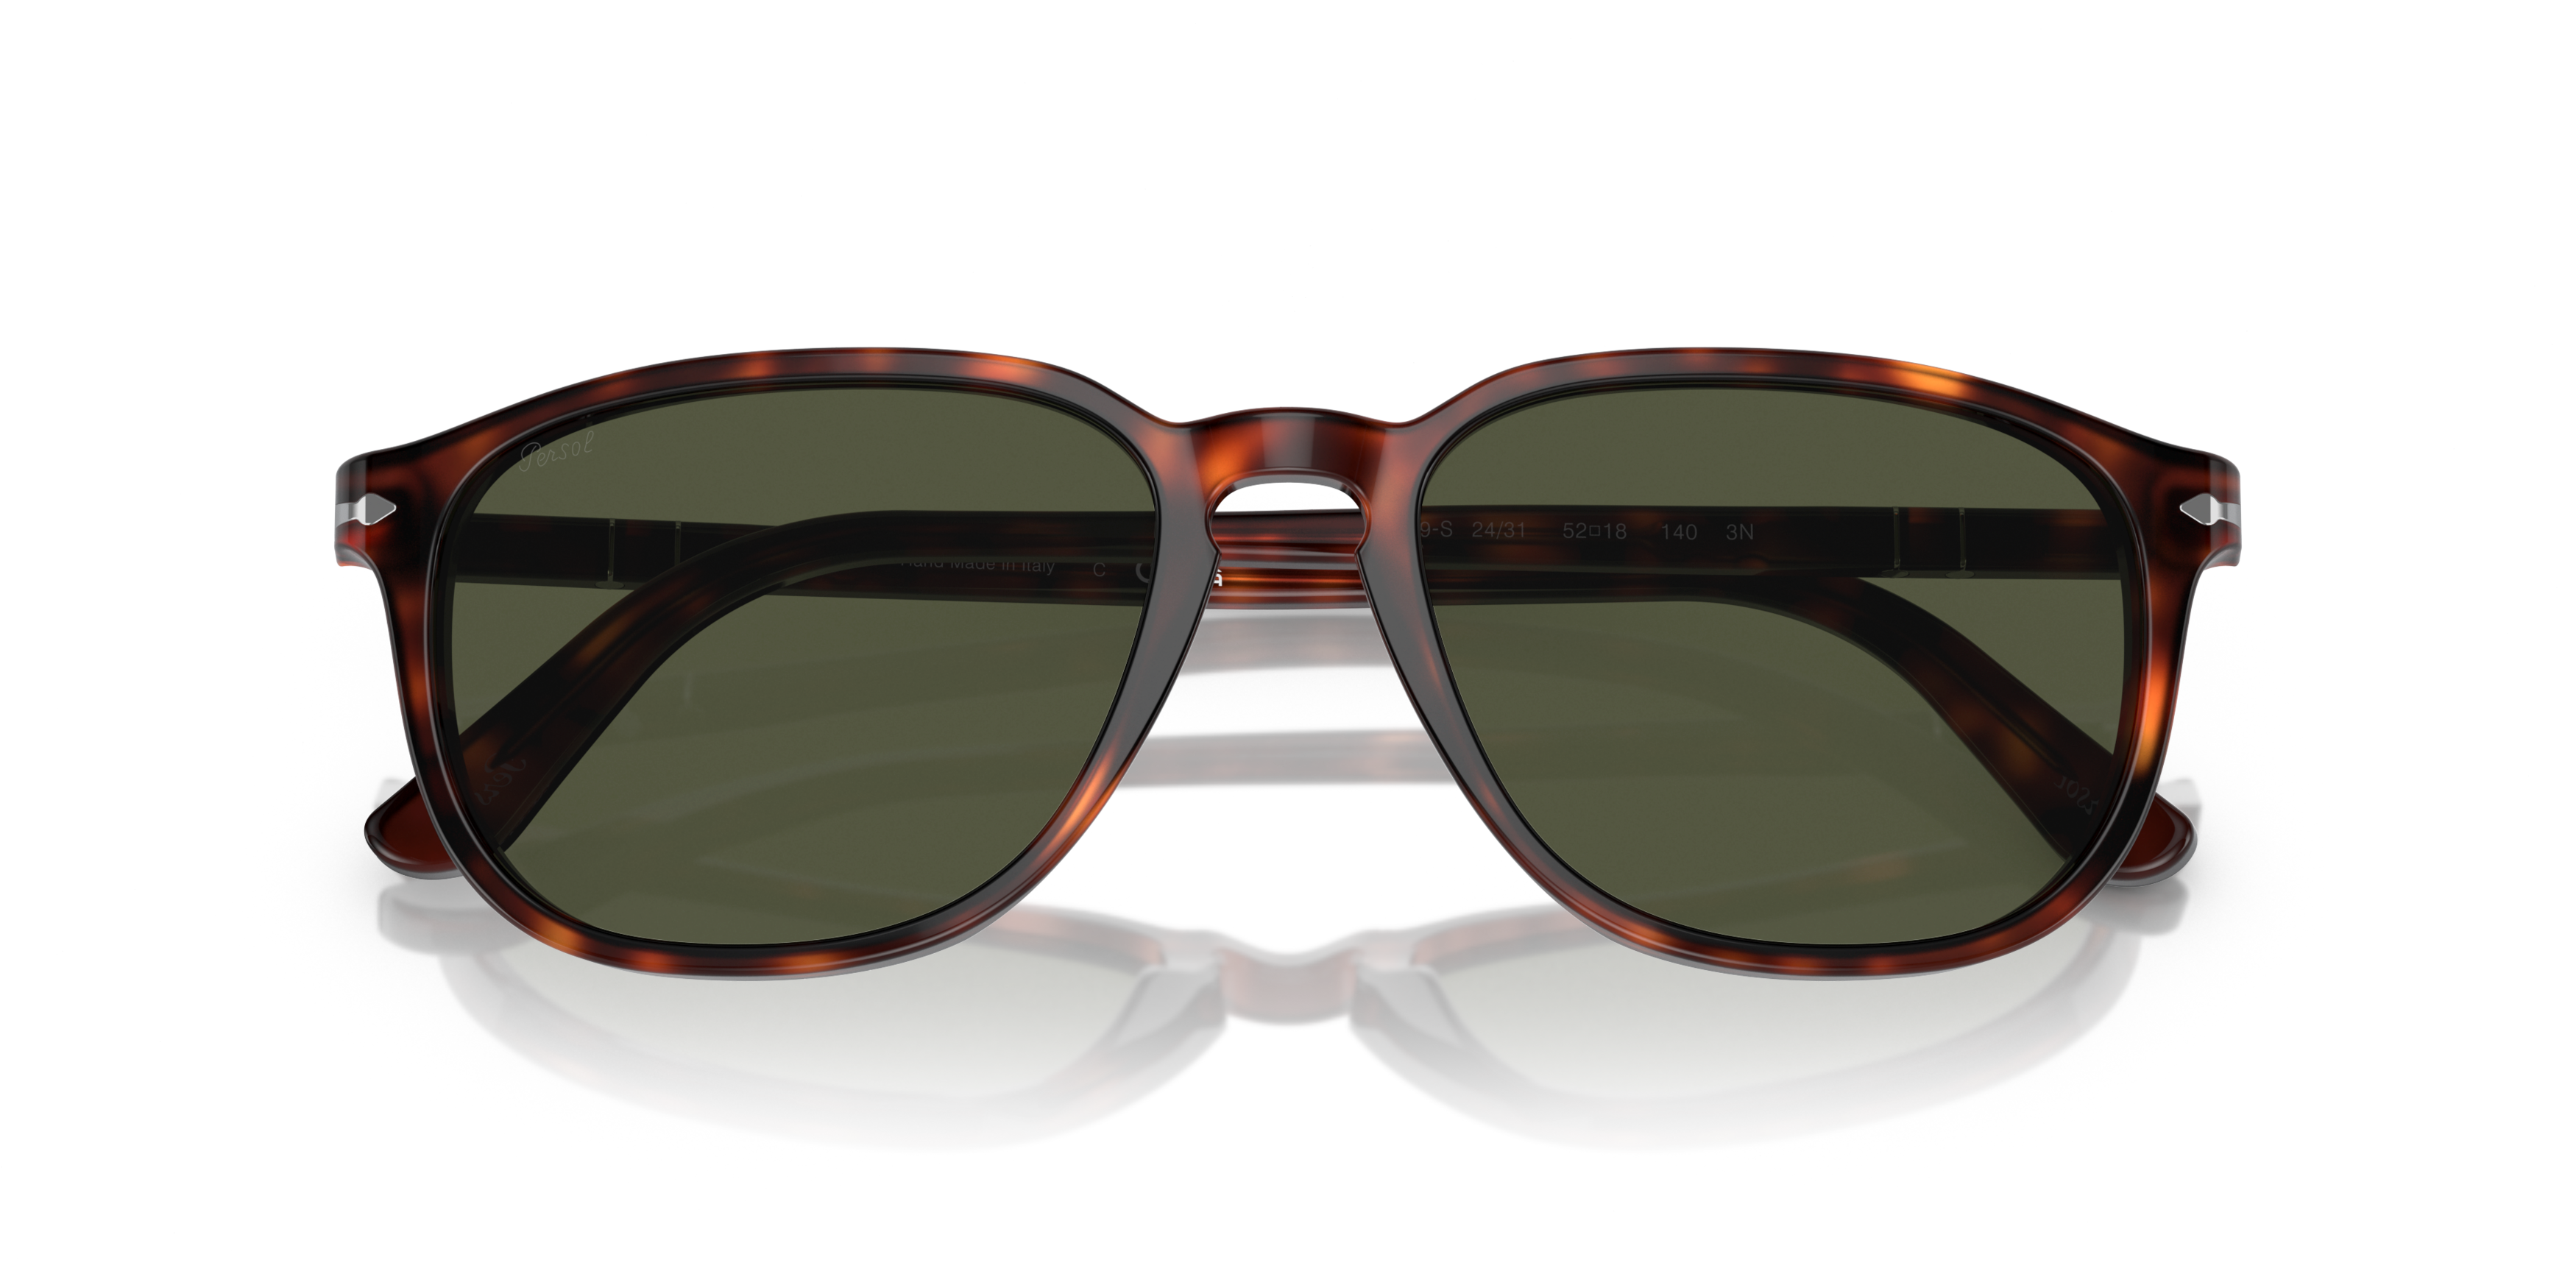 [products.image.folded] Persol 0PO3019S 24/31